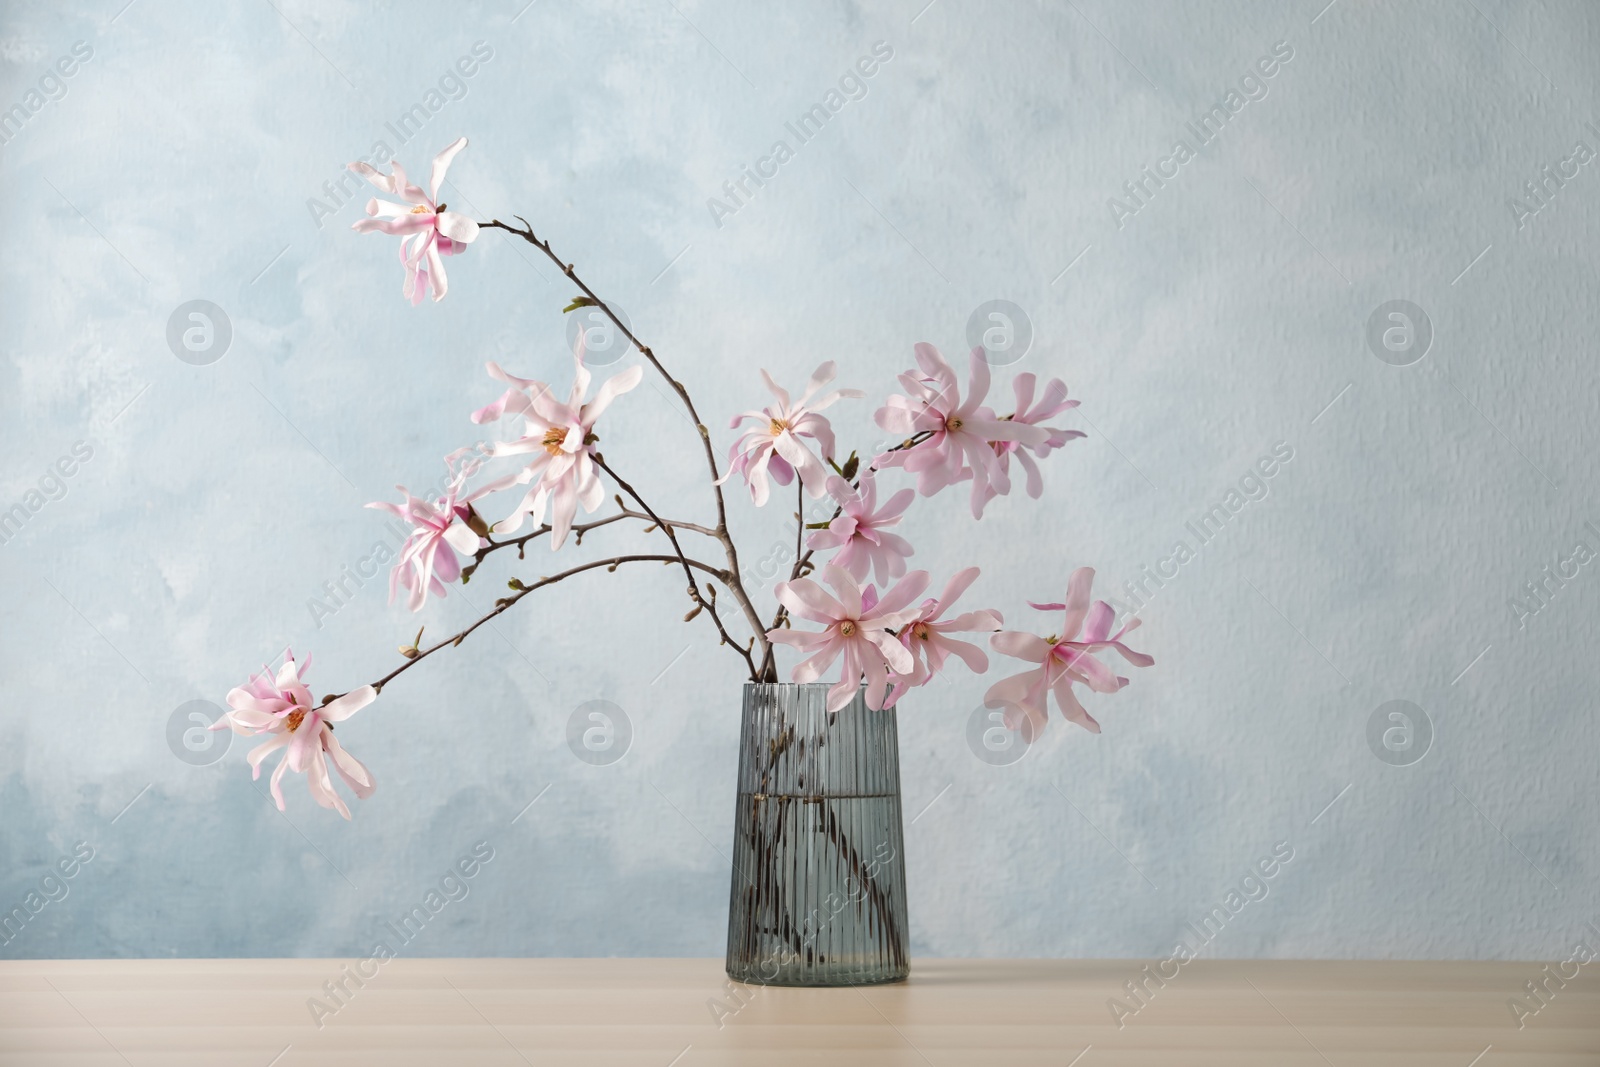 Photo of Magnolia tree branches with beautiful flowers in glass vase on wooden table against light blue background